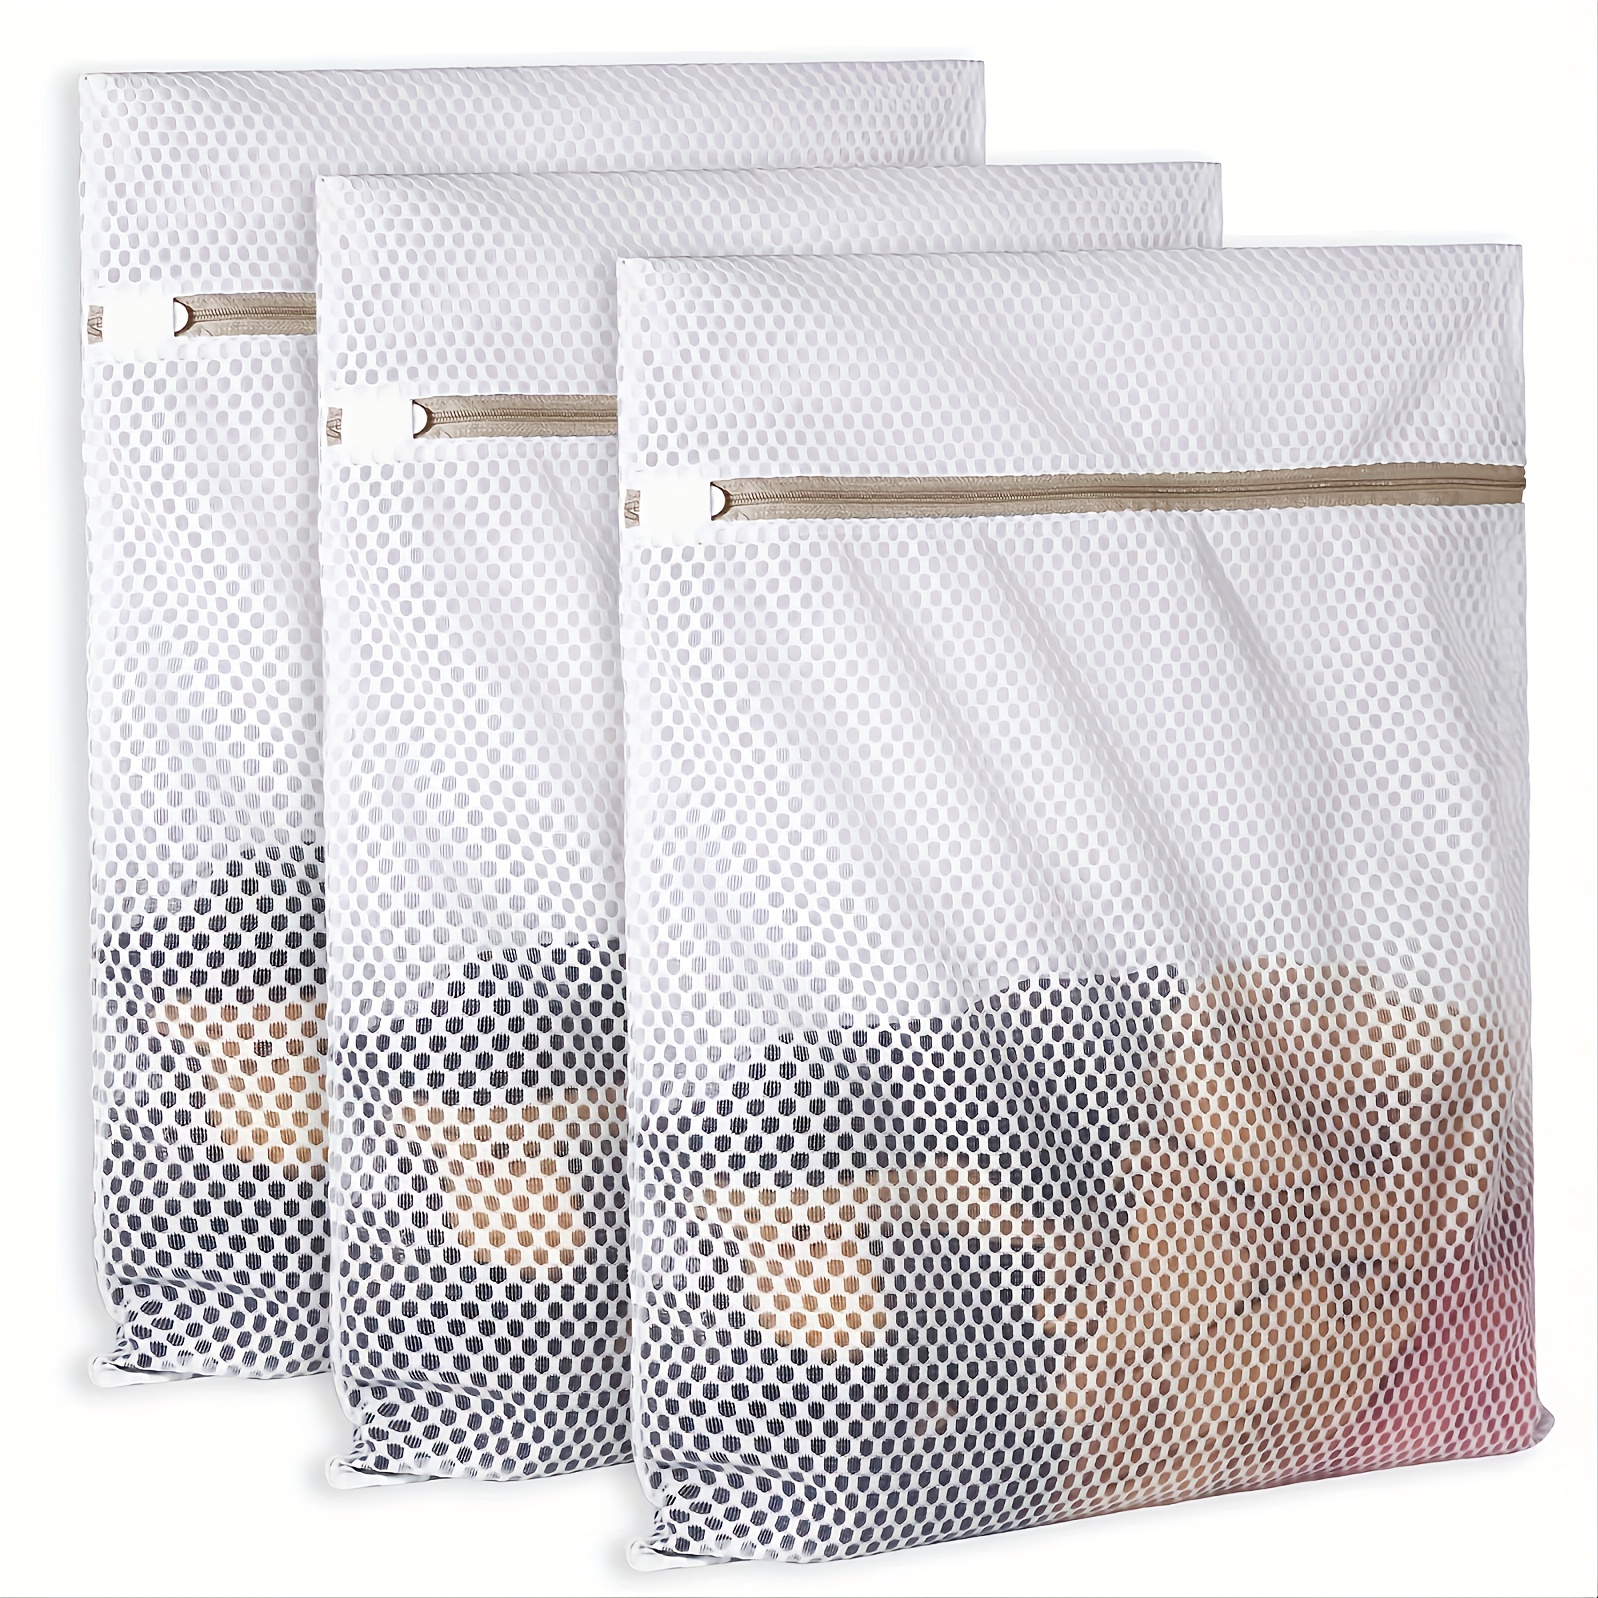 

3pcs Durable Honeycomb Mesh Laundry Bags For Delicates, 125gsm Net Fabric Durable And Reusable Delicate Wash Bag, Travel Organization Bag For Lingerie, Clothes, Jeans, Bath Towel, Sock, 12 X 16 Inches